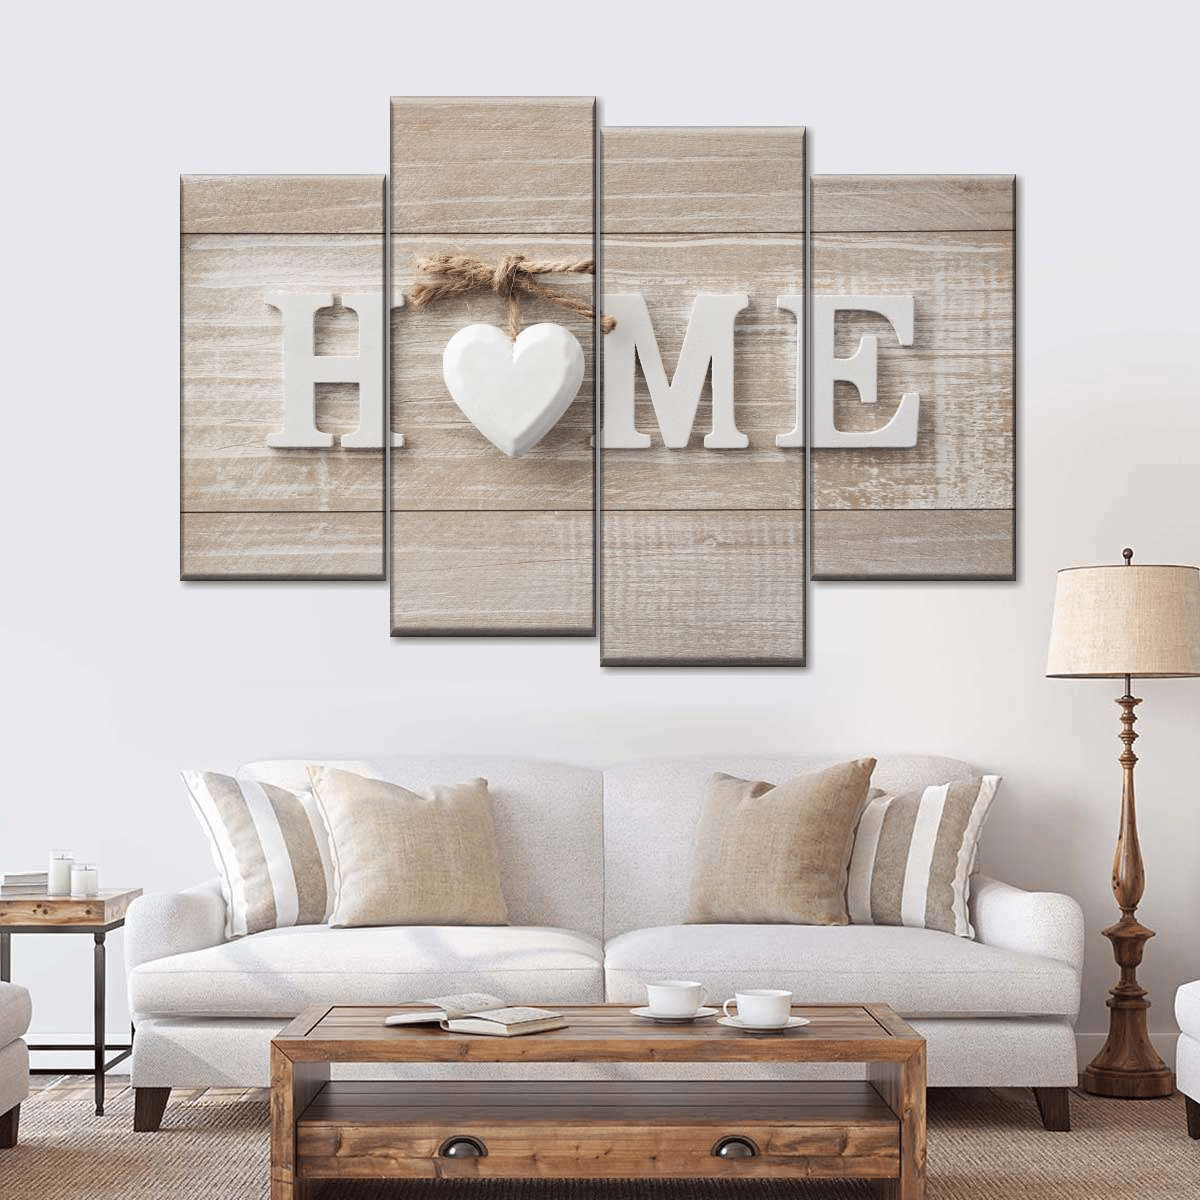 #How to Decorate Your Home With our Room Wall art Collection